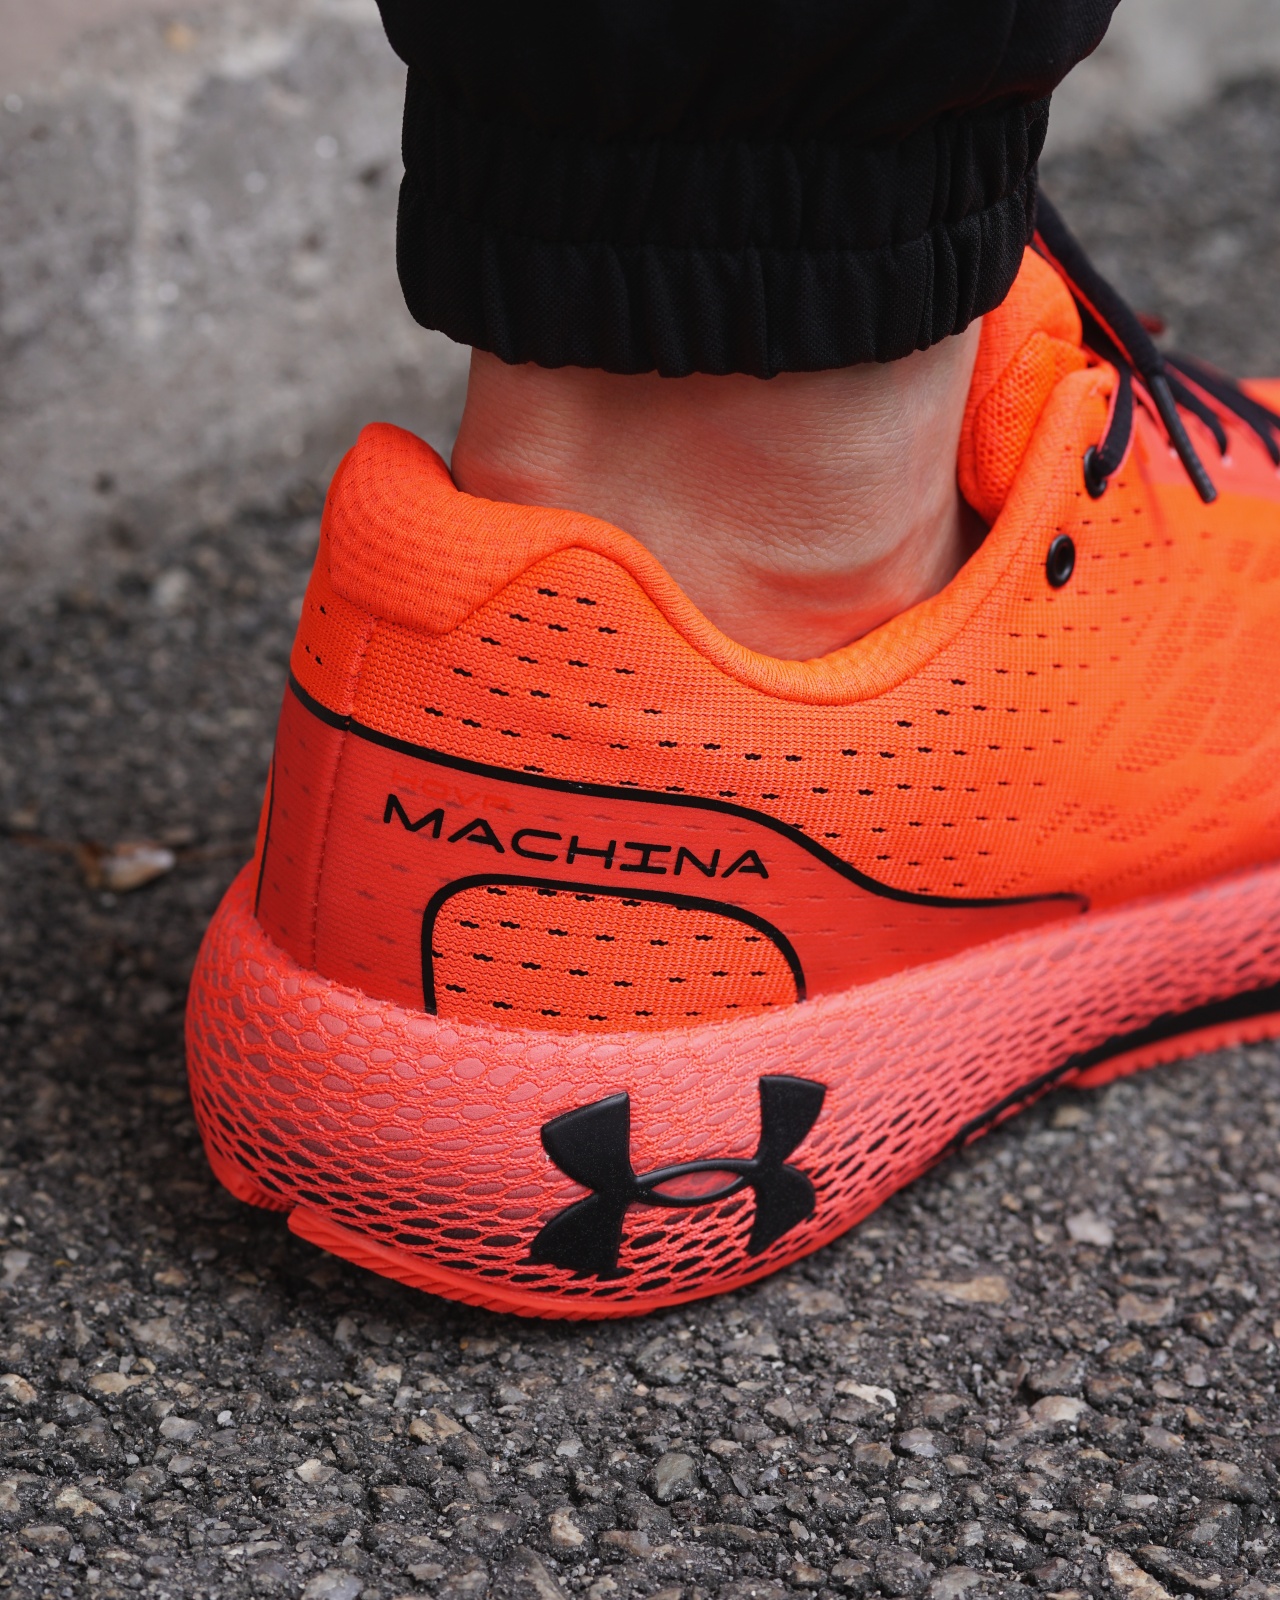 Under Armour HOVR Machina review: Smart running shoe â GadgetMatch